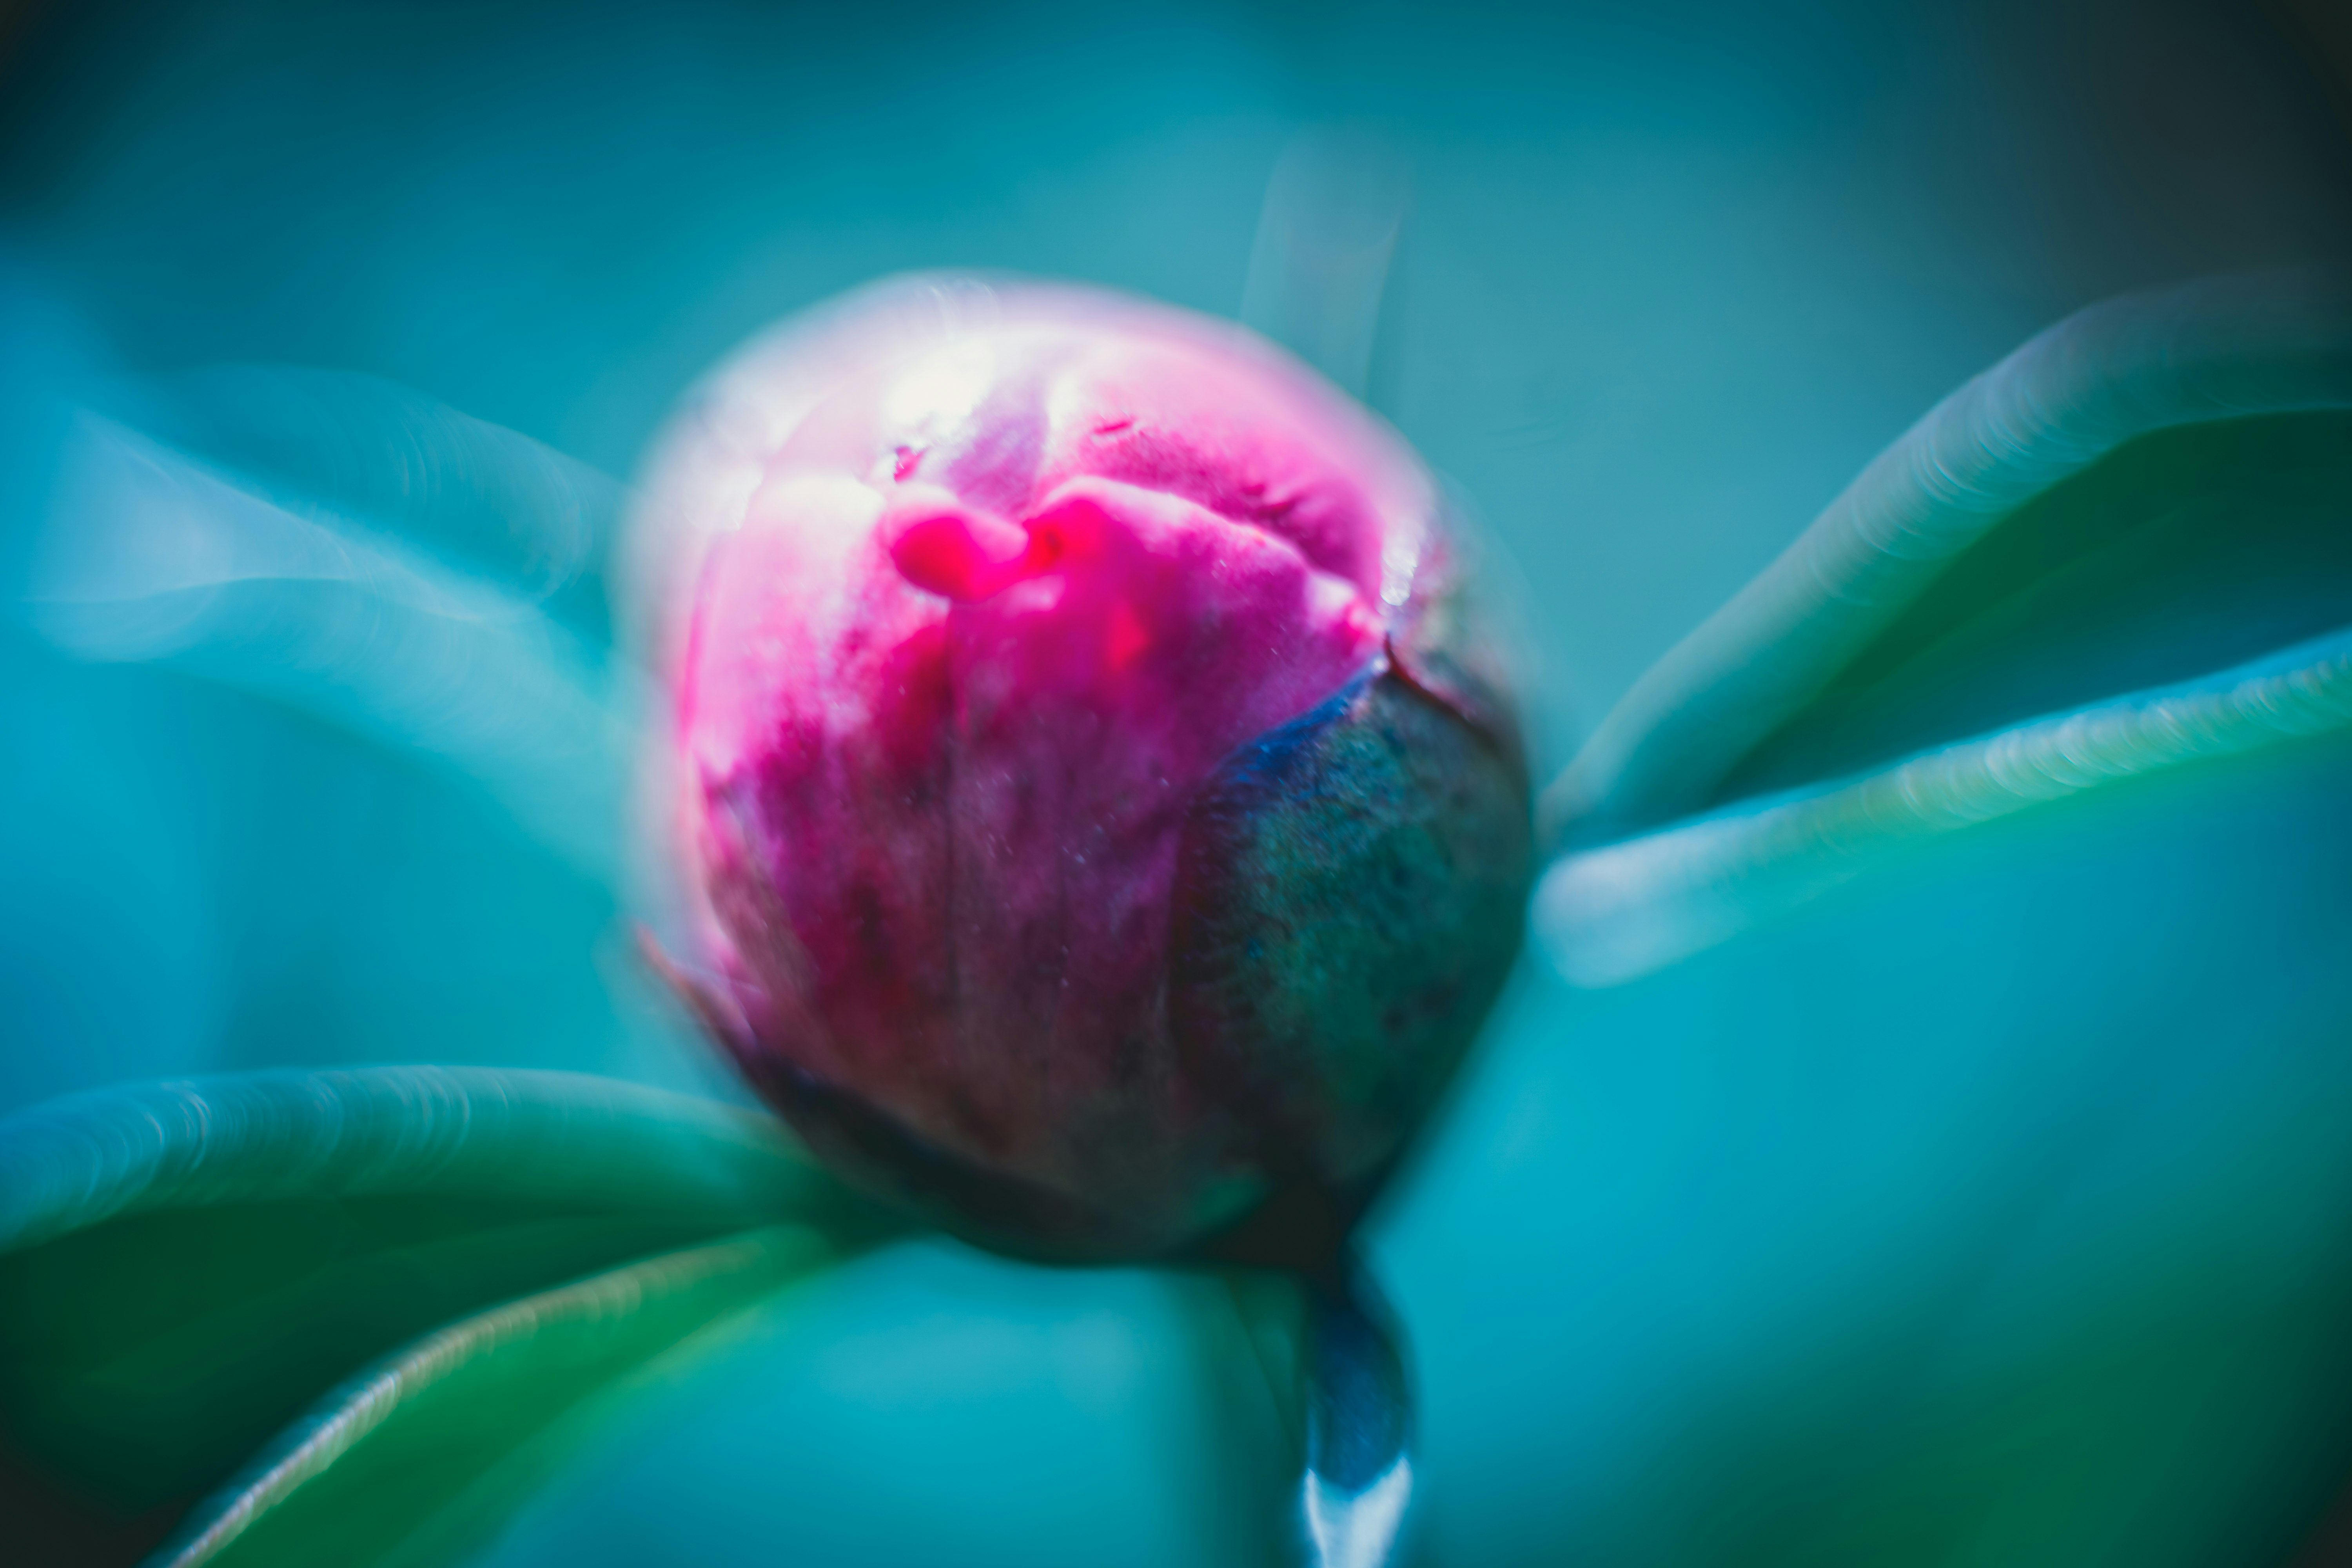 pink flower bud in close up photography